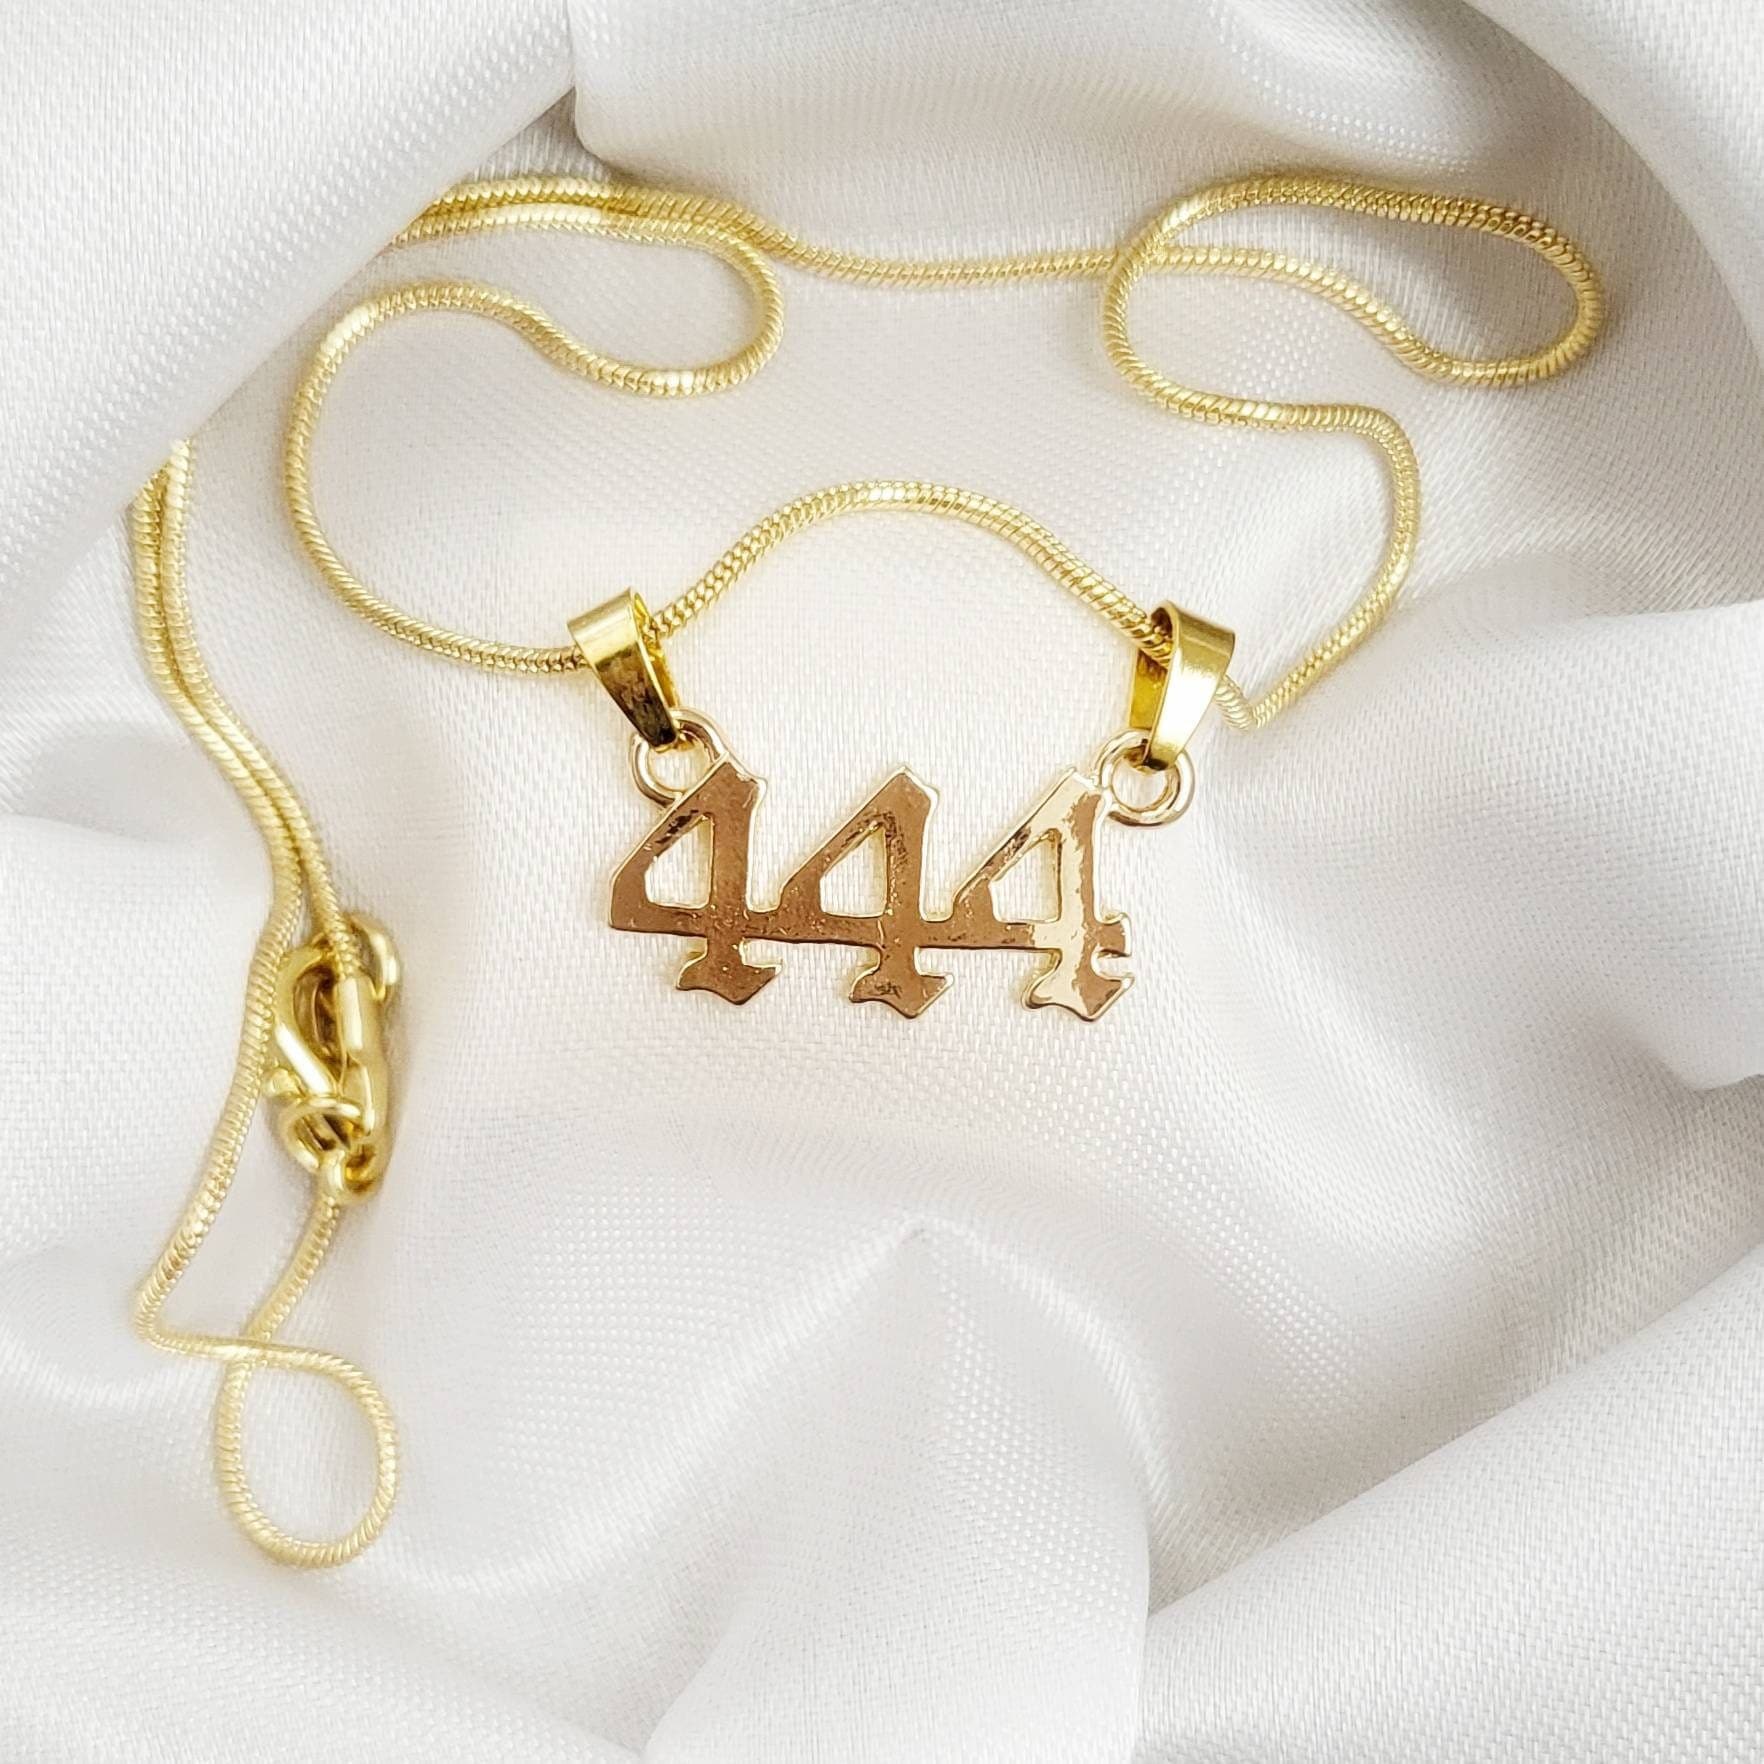 SYNCHRONICITY | Angel Number Necklace | Gold 111, 222, 333, 444, 555, 666, 777, 888, 999 Jewelry | Metaphysical Lucky Numerology Gift |